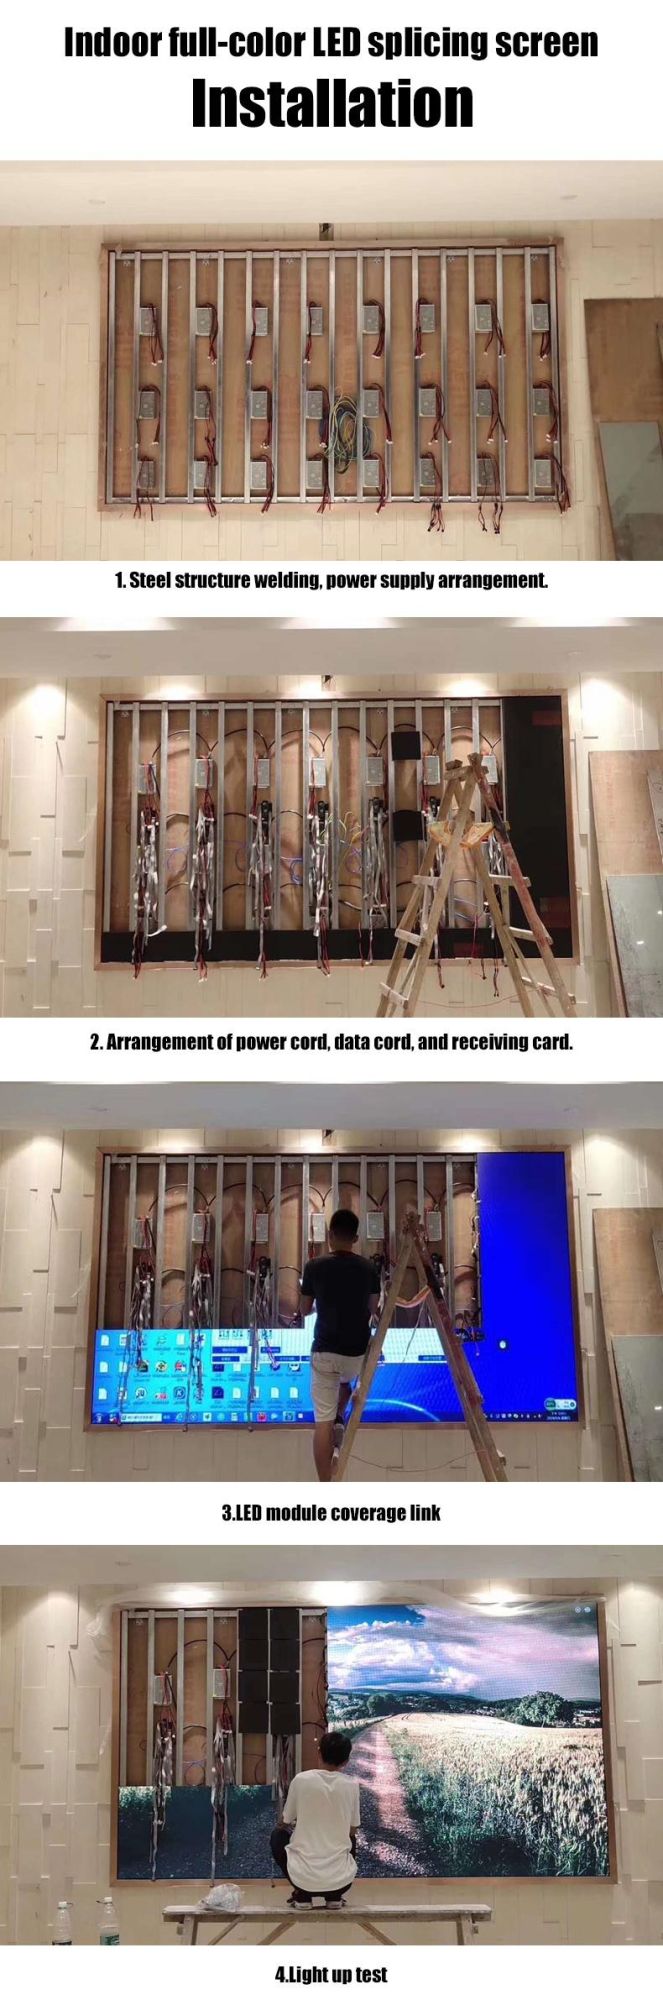 Indoor Full-Color LED Display LED Splicing Advertising Screen